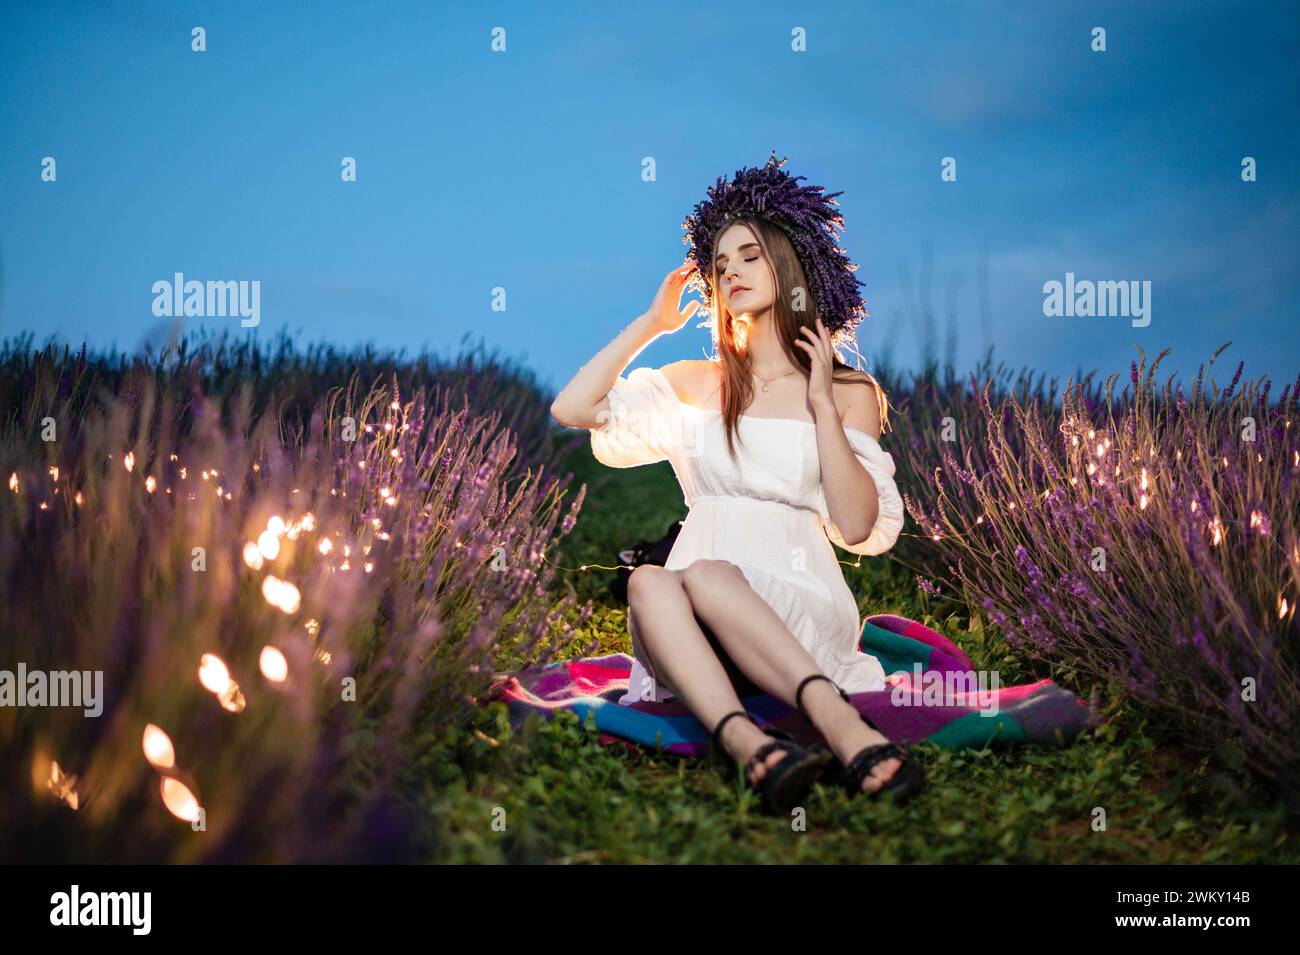 Ivano-Frankivsk, Ukraine July 28, 2023: The girl is sitting on the grass between rows of lavender, lavender bushes and flowers are illuminated by garl Stock Photo